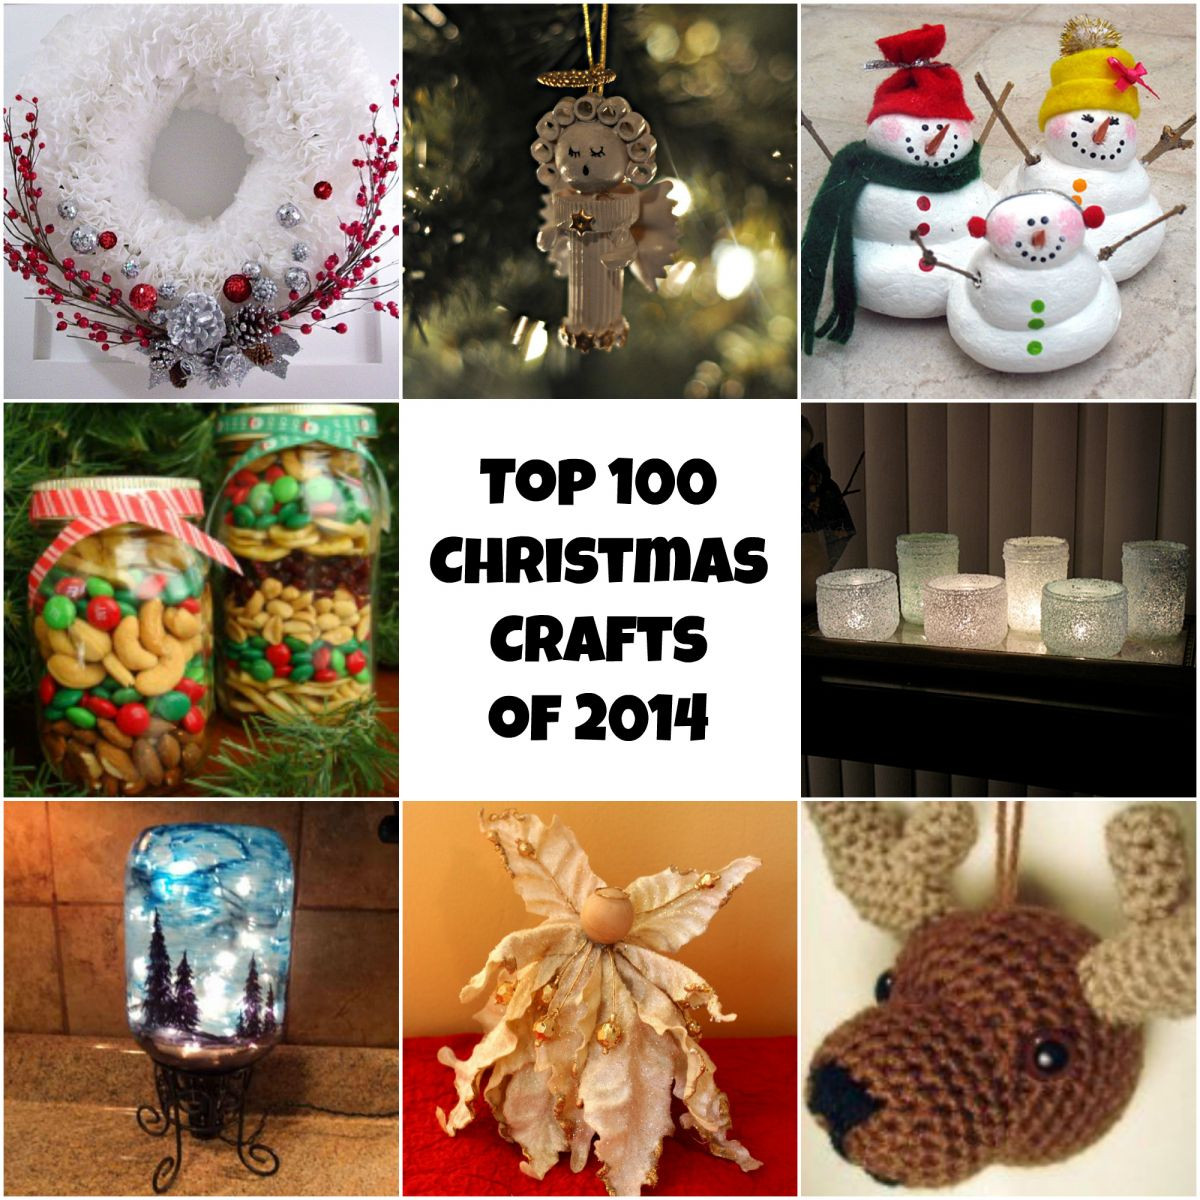 Christmas Gifts For Crafters
 Top 100 DIY Christmas Crafts of 2014 Homemade Christmas